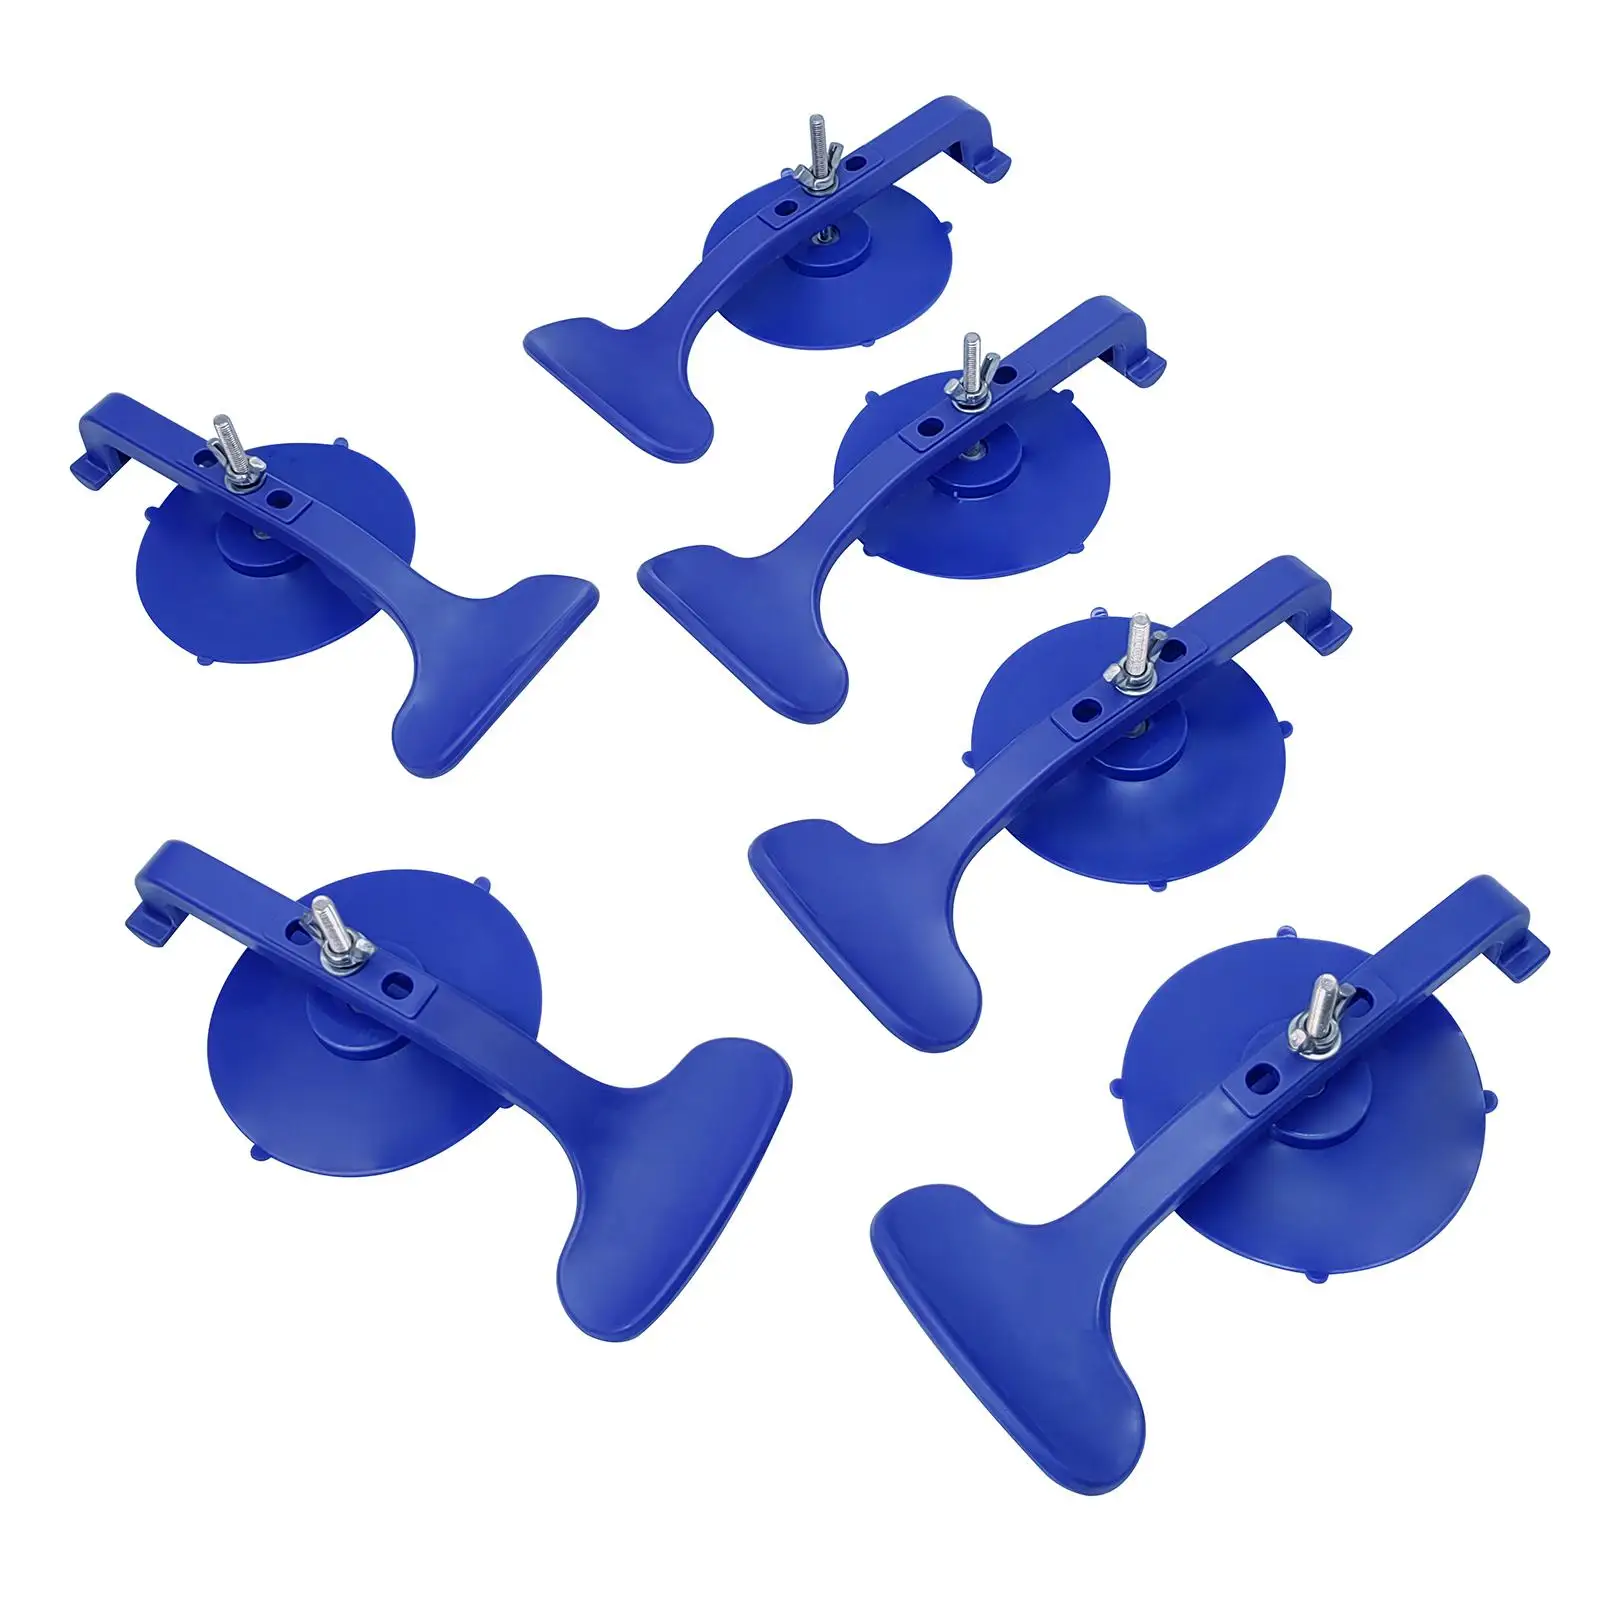 6Pcs Practical Suction Clamp Set Quick Release Easy to Operate Adjustable